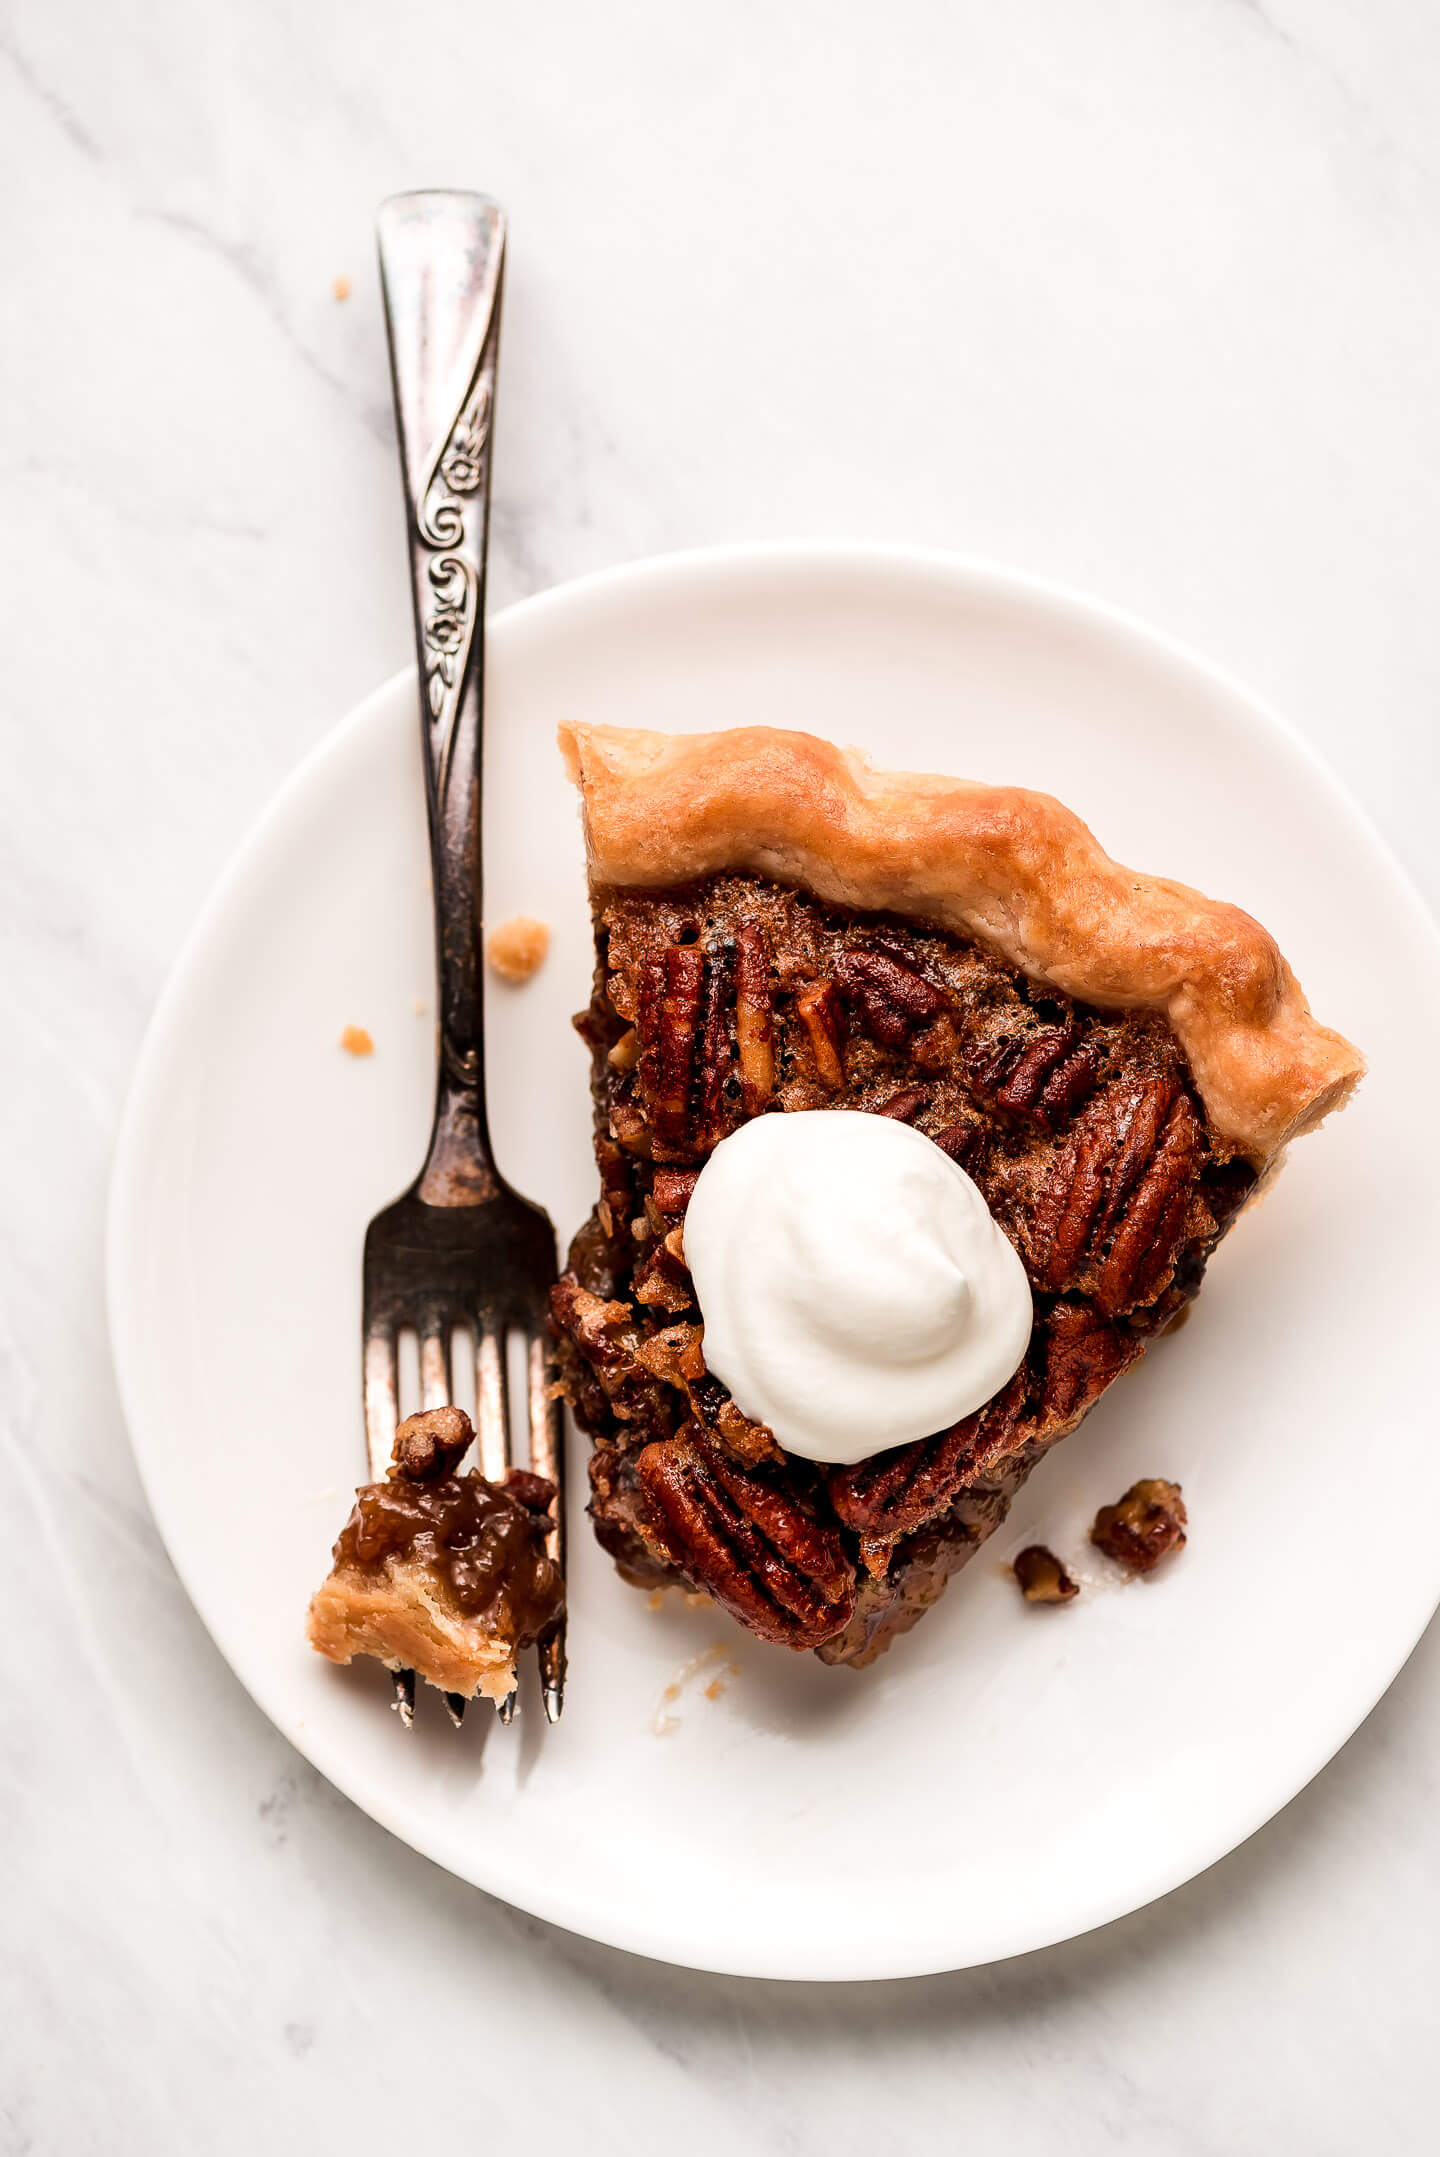 A slice of pecan pie garnished with a dollop of whipped cream.